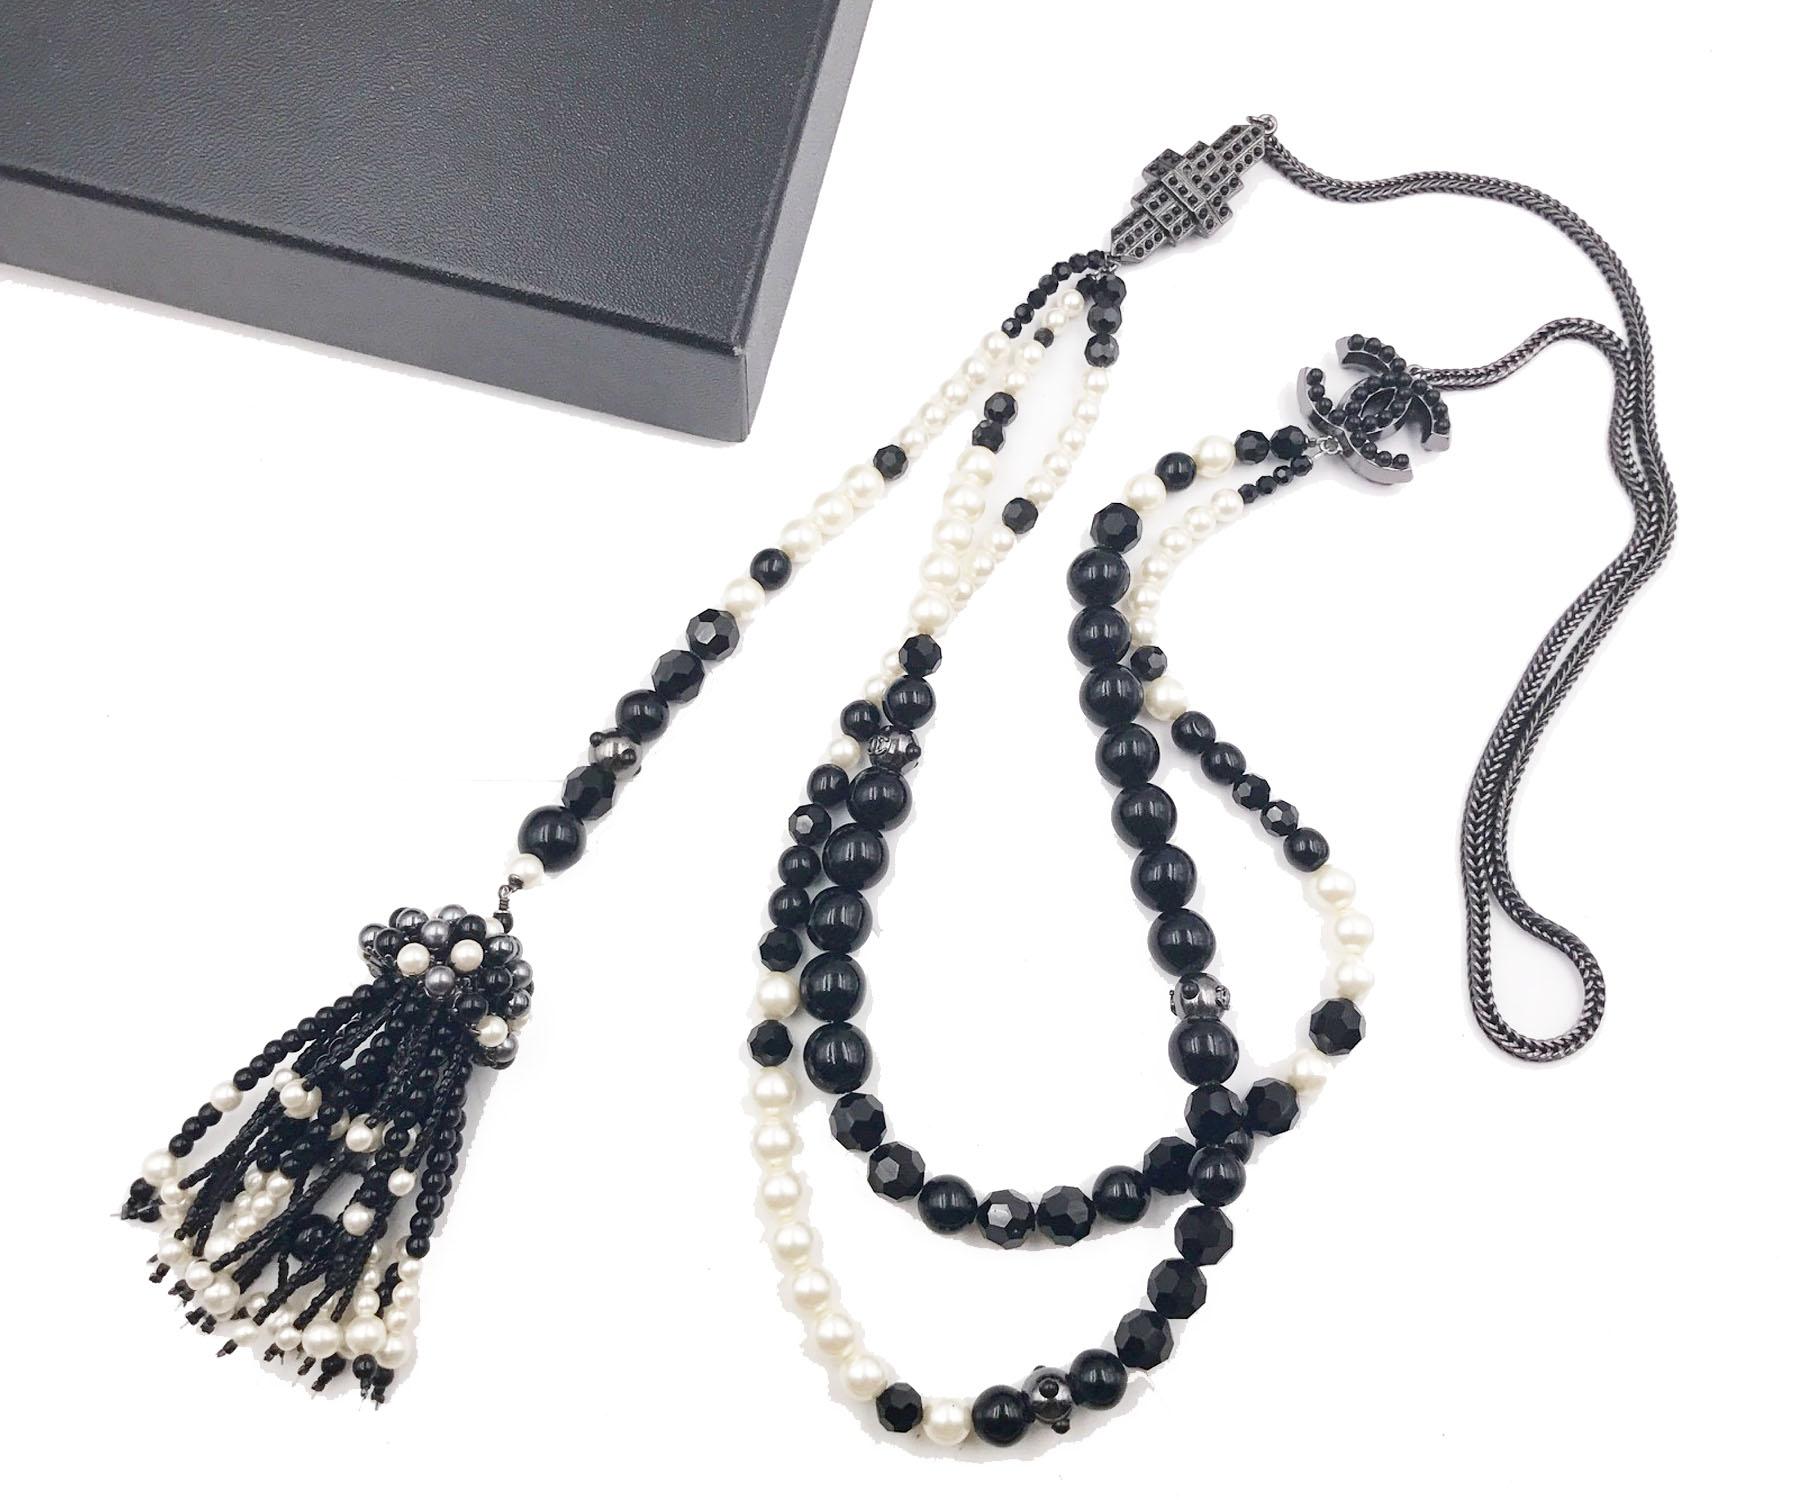 Chanel Rare Unique Black Stone Pearl Dangle Tassel Necklace

* Marked 02
* Made in France
* Comes with the original box

-The tassel is approximately 10″ long.
-The necklace approximately 36″.
-Very unique and rare
-It is missing one small black